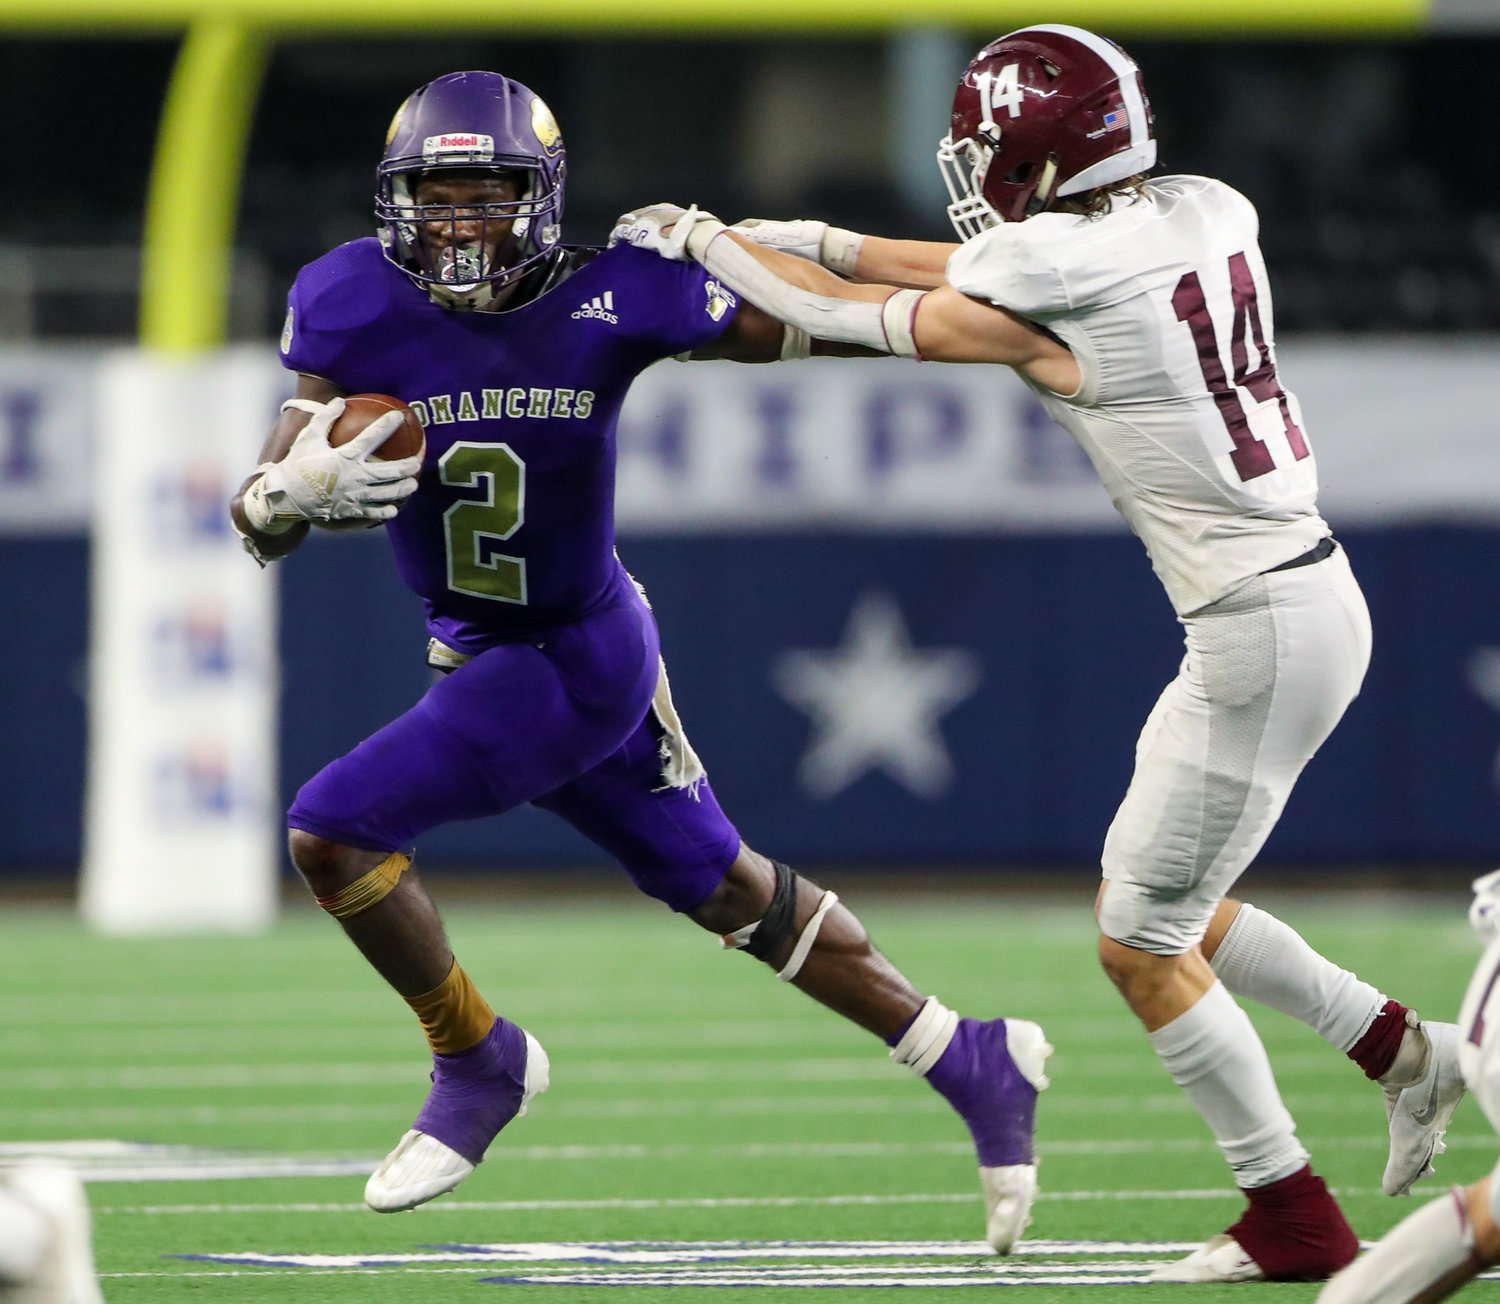 Shiner Comanches junior Dalton Brooks (2) carries the ball during the Class 2A Division I state football championship game between Shiner and Hawley on December 15, 2021 in Arlington, Texas.